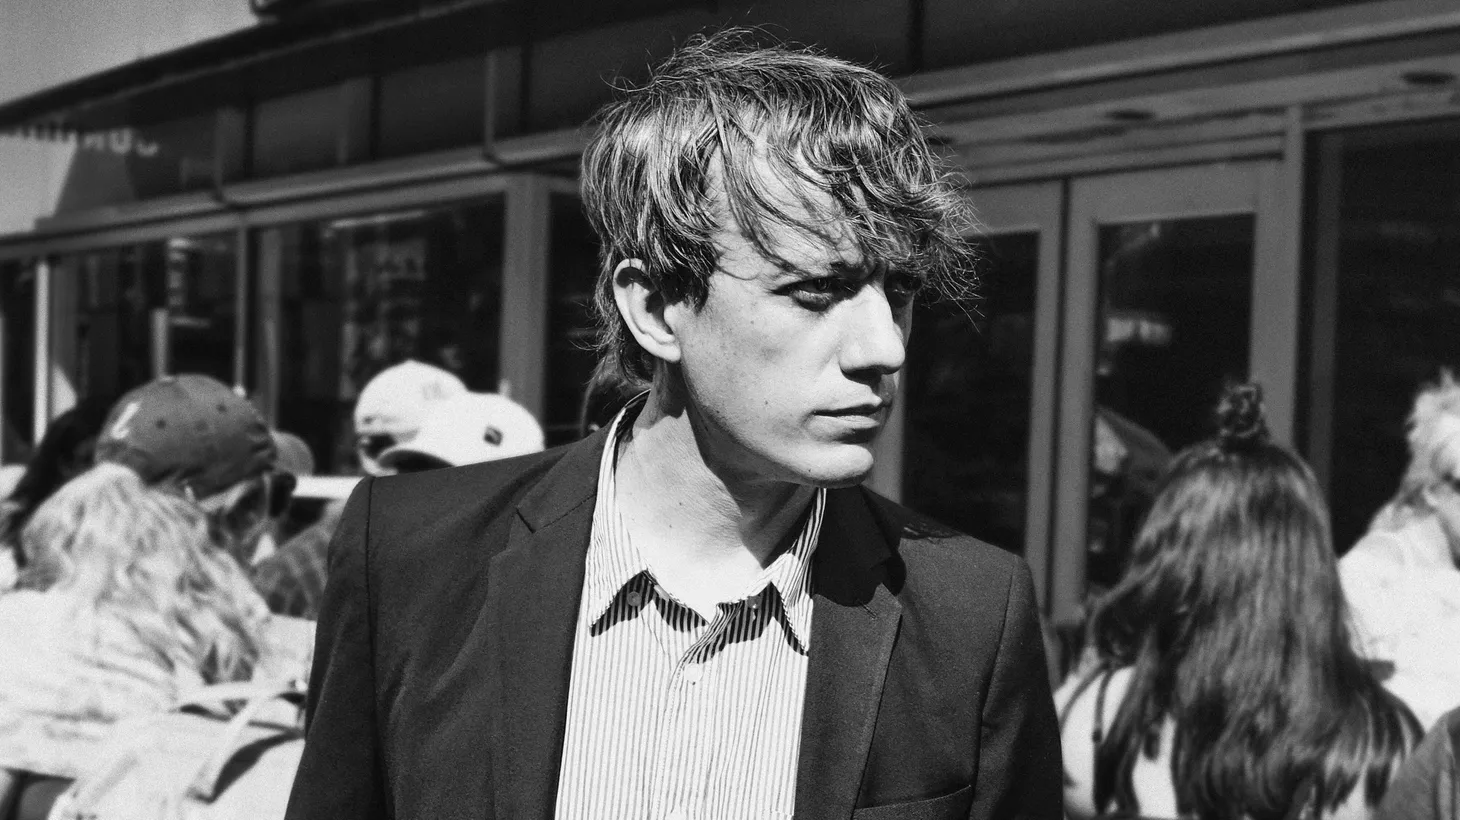 Steve Gunn showcases his guitar prowess and lyrical talents on his breakthrough fourth album The Unseen In Between. The Pennsylvania native will perform new tracks and talk about what has influenced his song writing.